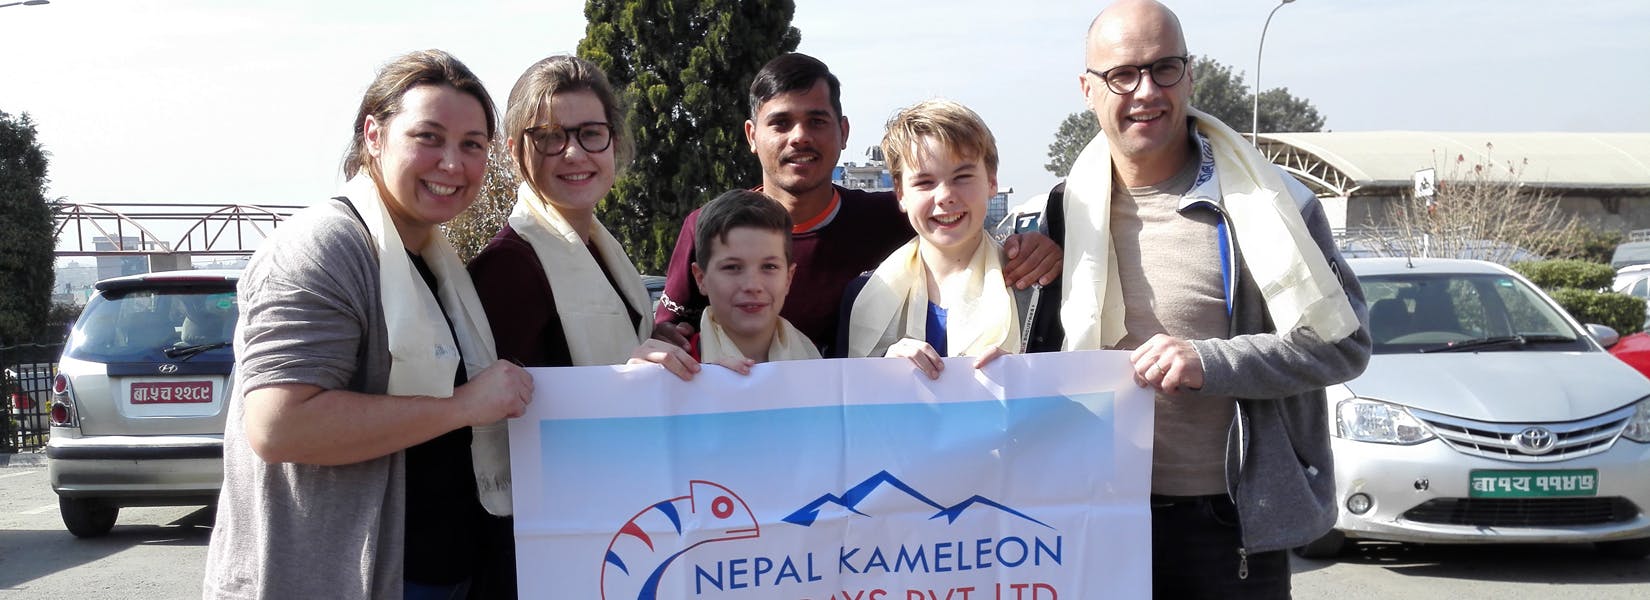 Trekking and Tours in Nepal with Kids Children